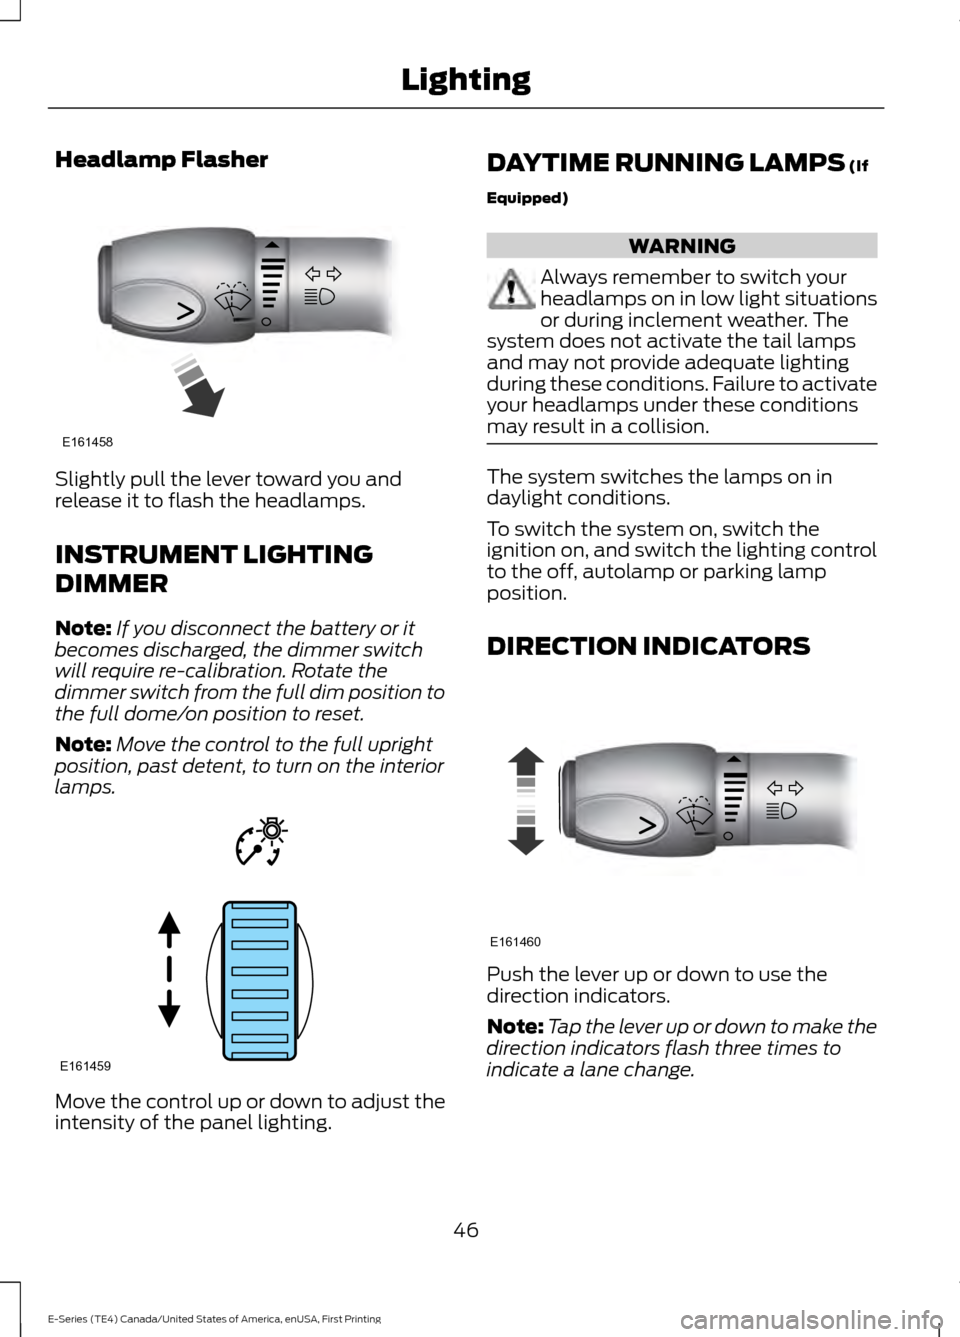 FORD E SERIES 2017 4.G Owners Manual Headlamp Flasher
Slightly pull the lever toward you and
release it to flash the headlamps.
INSTRUMENT LIGHTING
DIMMER
Note:
If you disconnect the battery or it
becomes discharged, the dimmer switch
wi